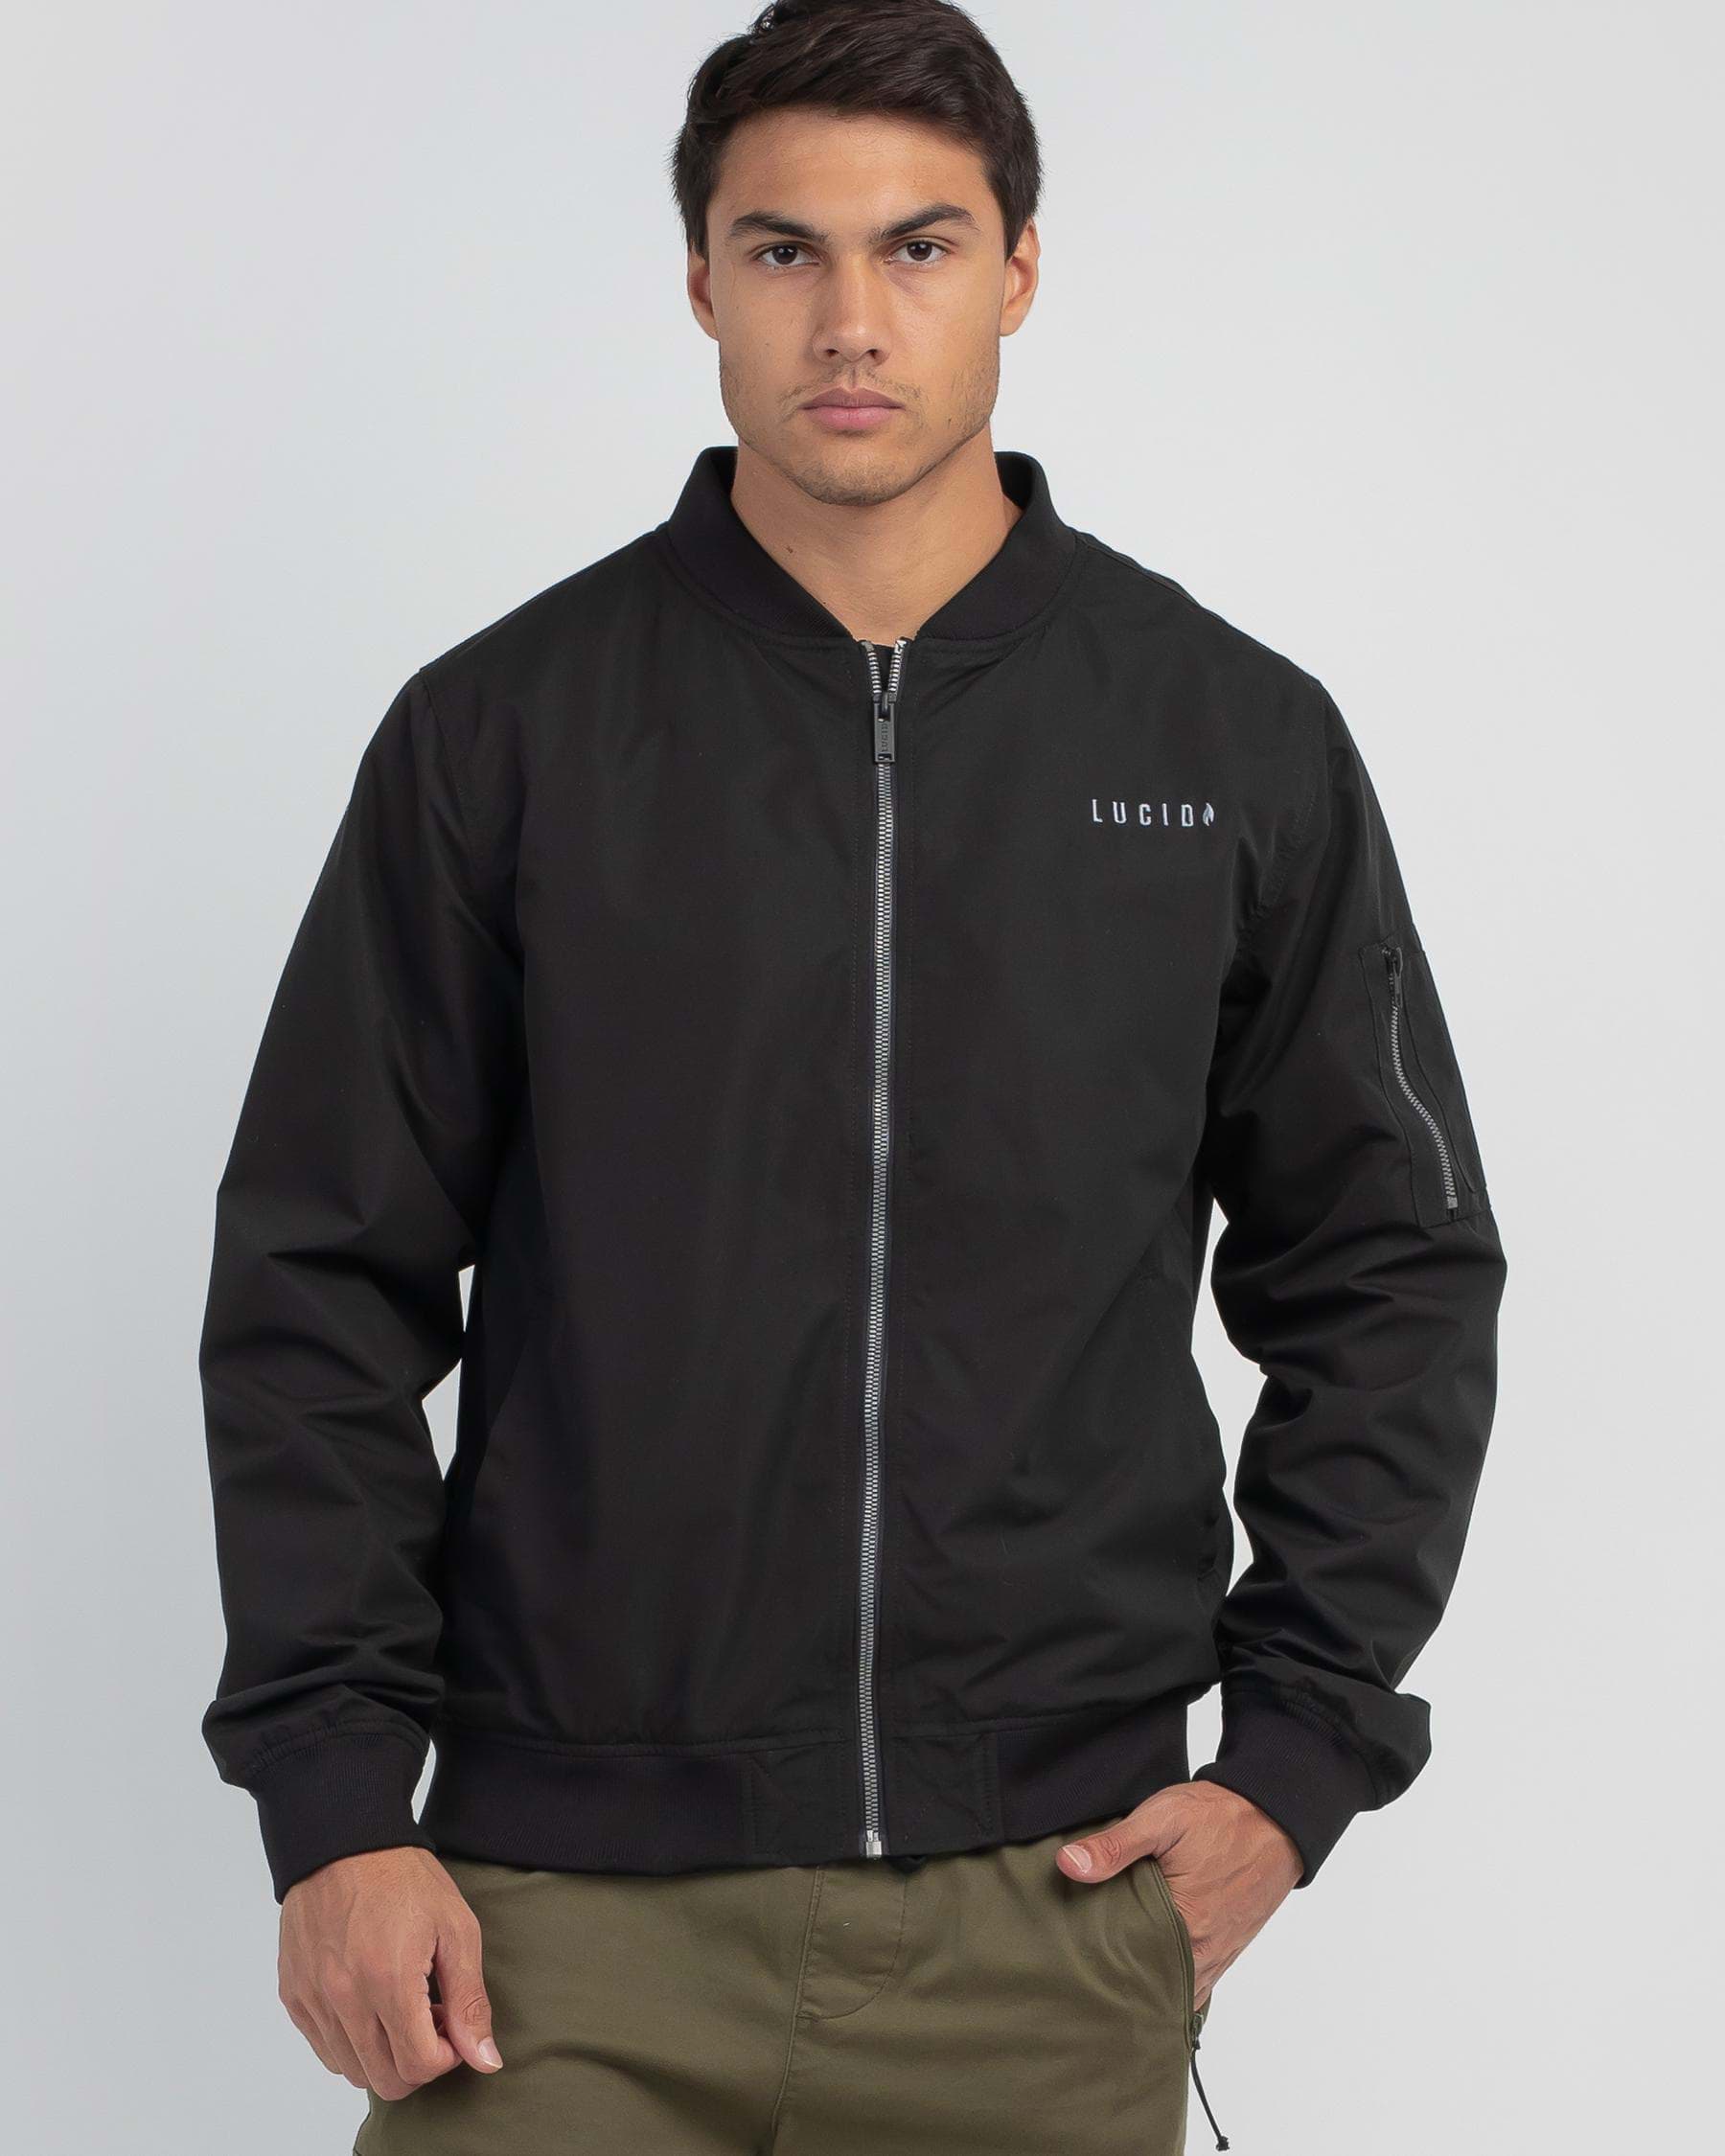 Lucid Official Jacket In Black | City Beach United States